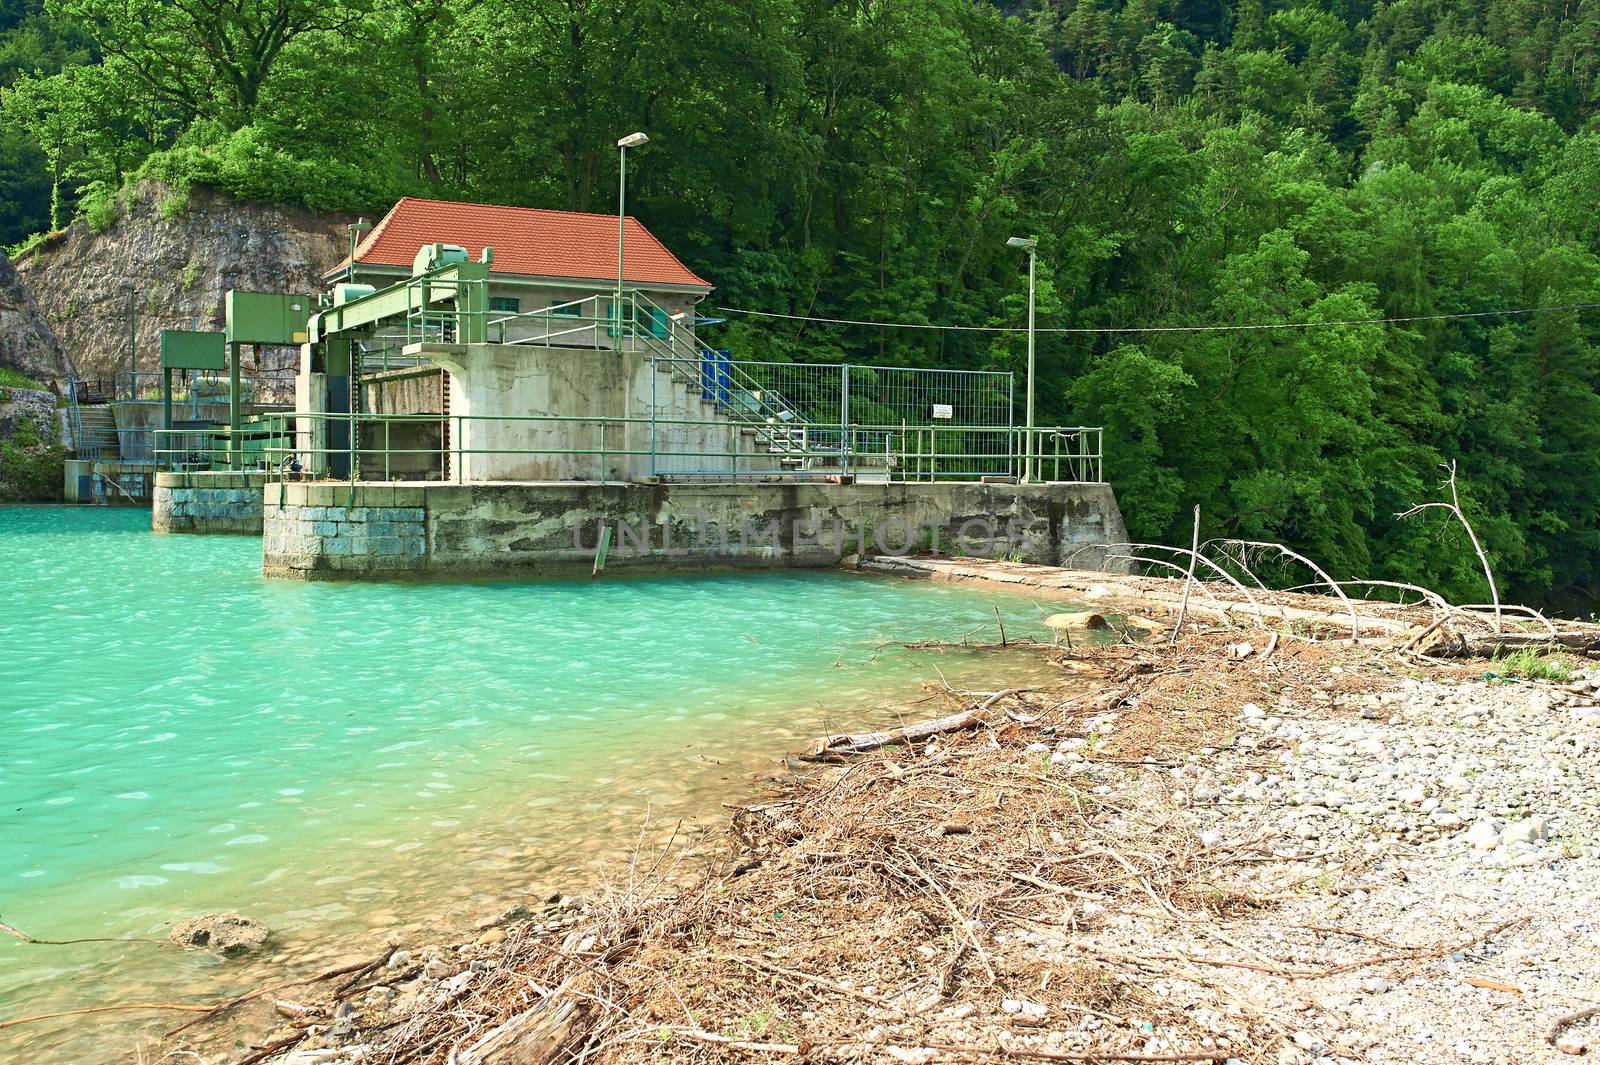 Hydroelectric power plant by haveseen